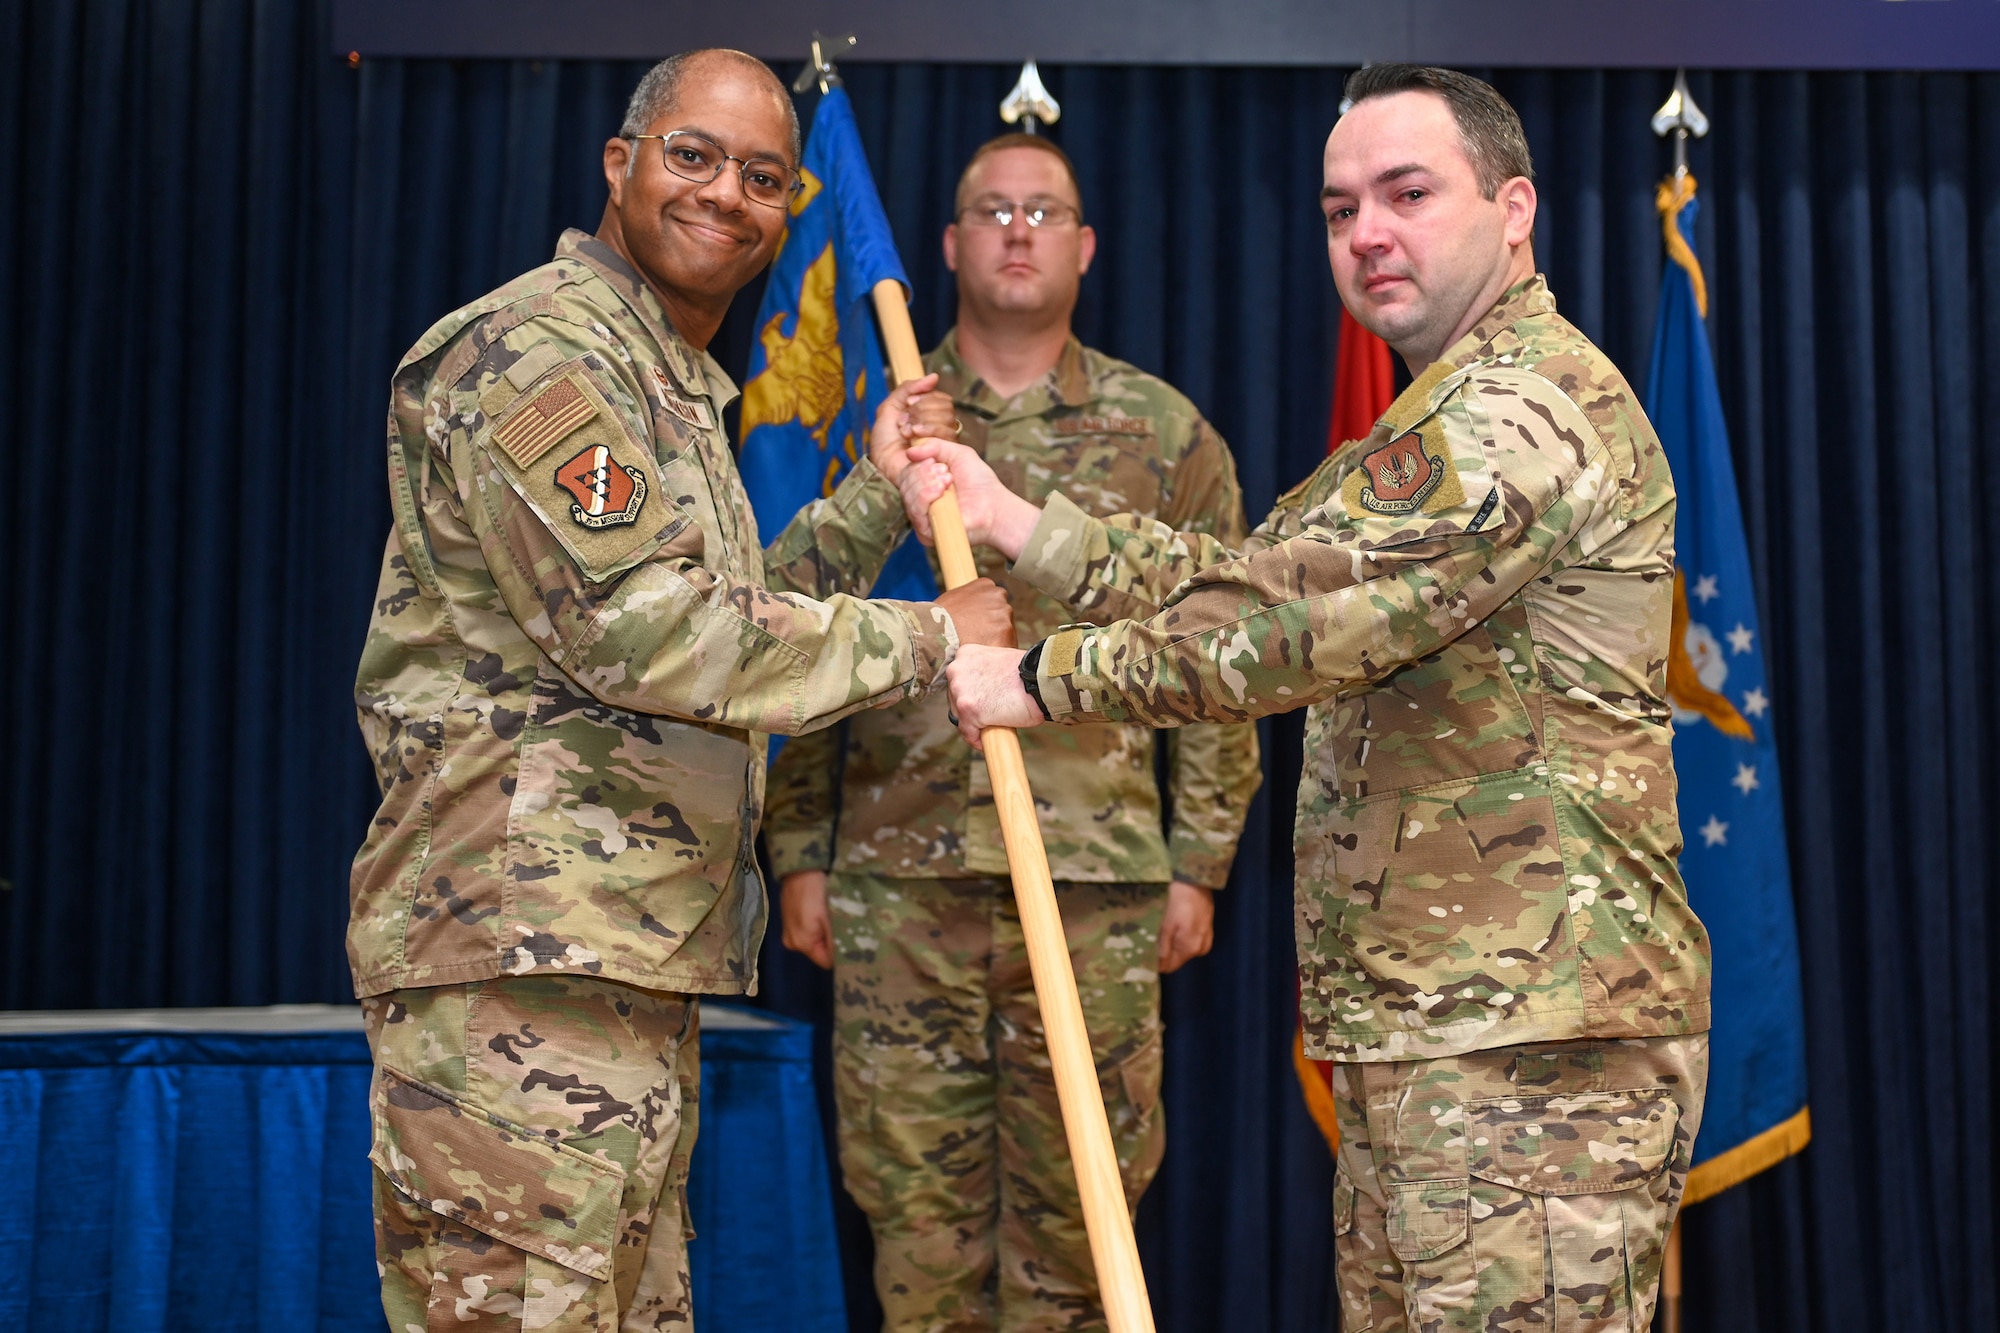 Maj. Daniel Jamerson (right), outgoing 39th Force Support Squadron commander, relinquishes the guidon to Col. Christopher Robinson, 39th Mission Support Group commander, during a change of command ceremony at Incirlik Air Base, Turkey, July 15, 2022.